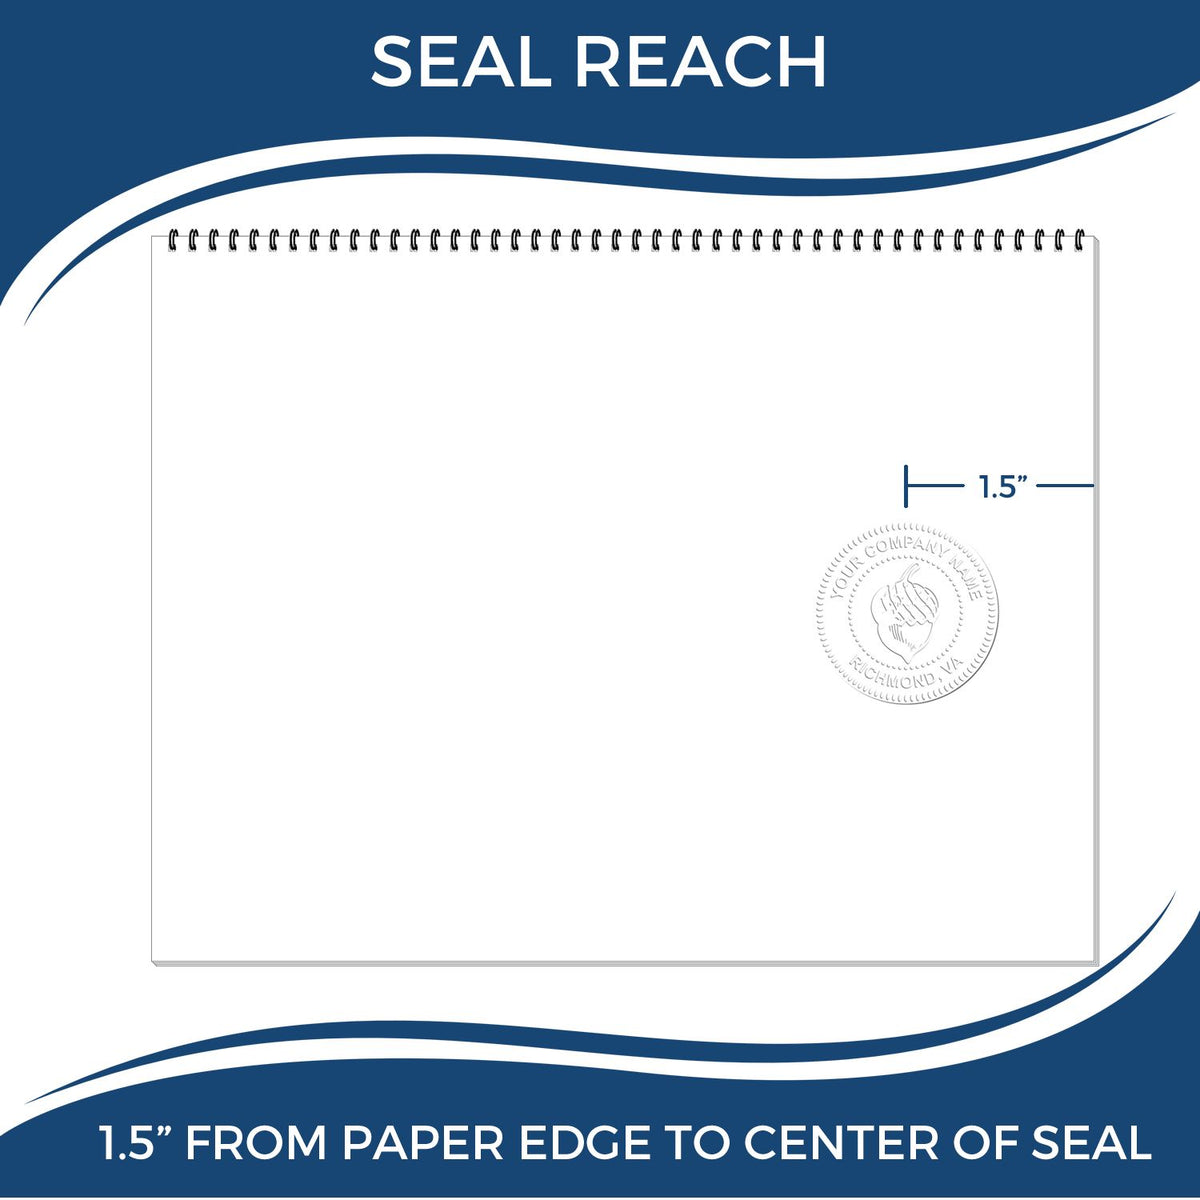 An infographic showing the seal reach which is represented by a ruler and a miniature seal image of the Gift Kansas Architect Seal